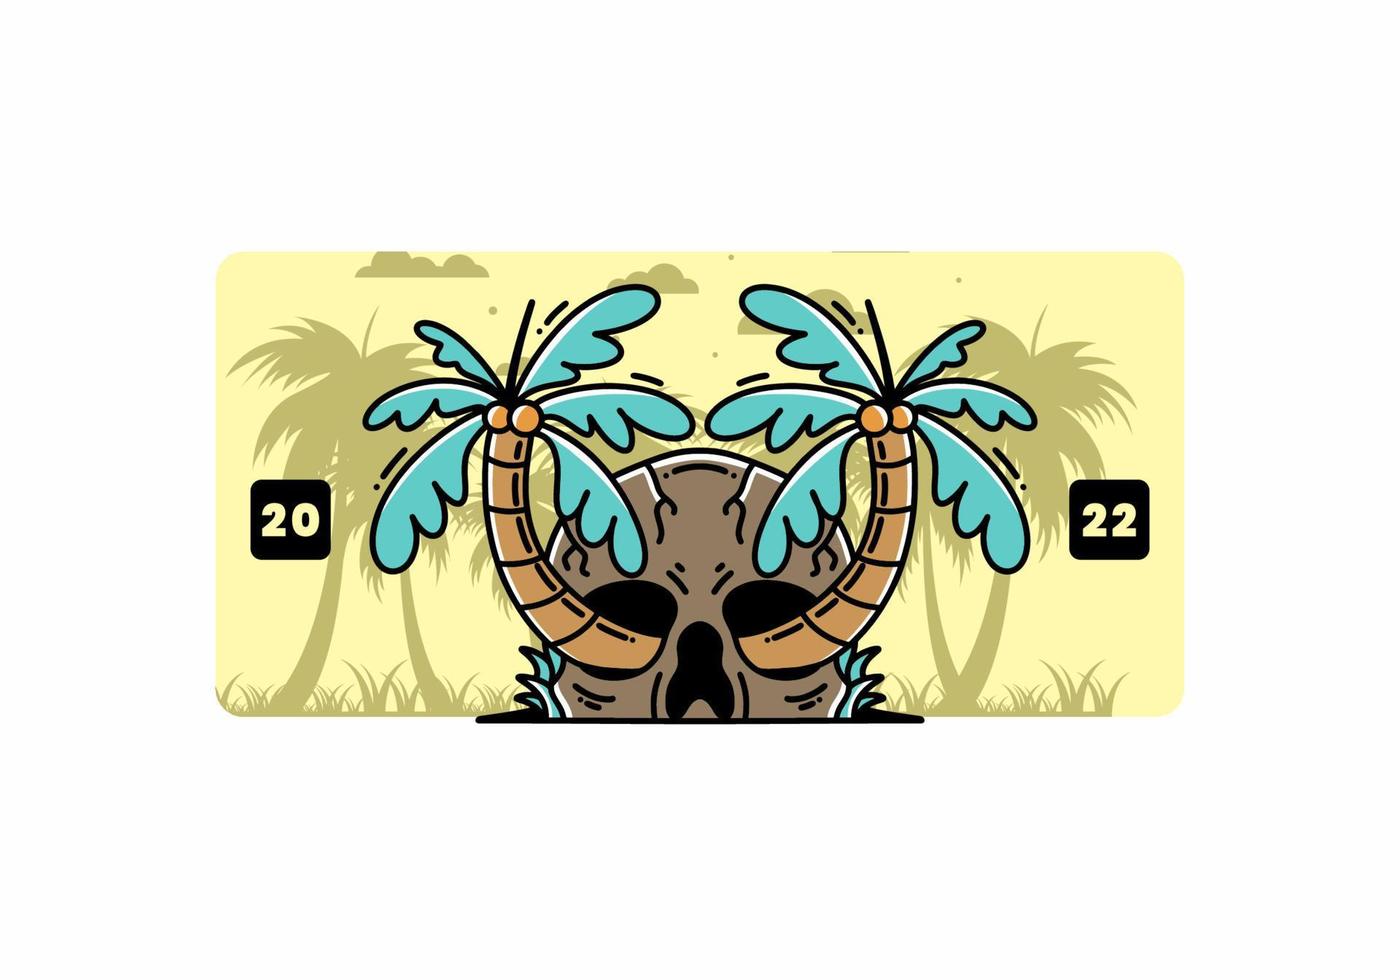 Two coconut trees growing on a skull illustration vector